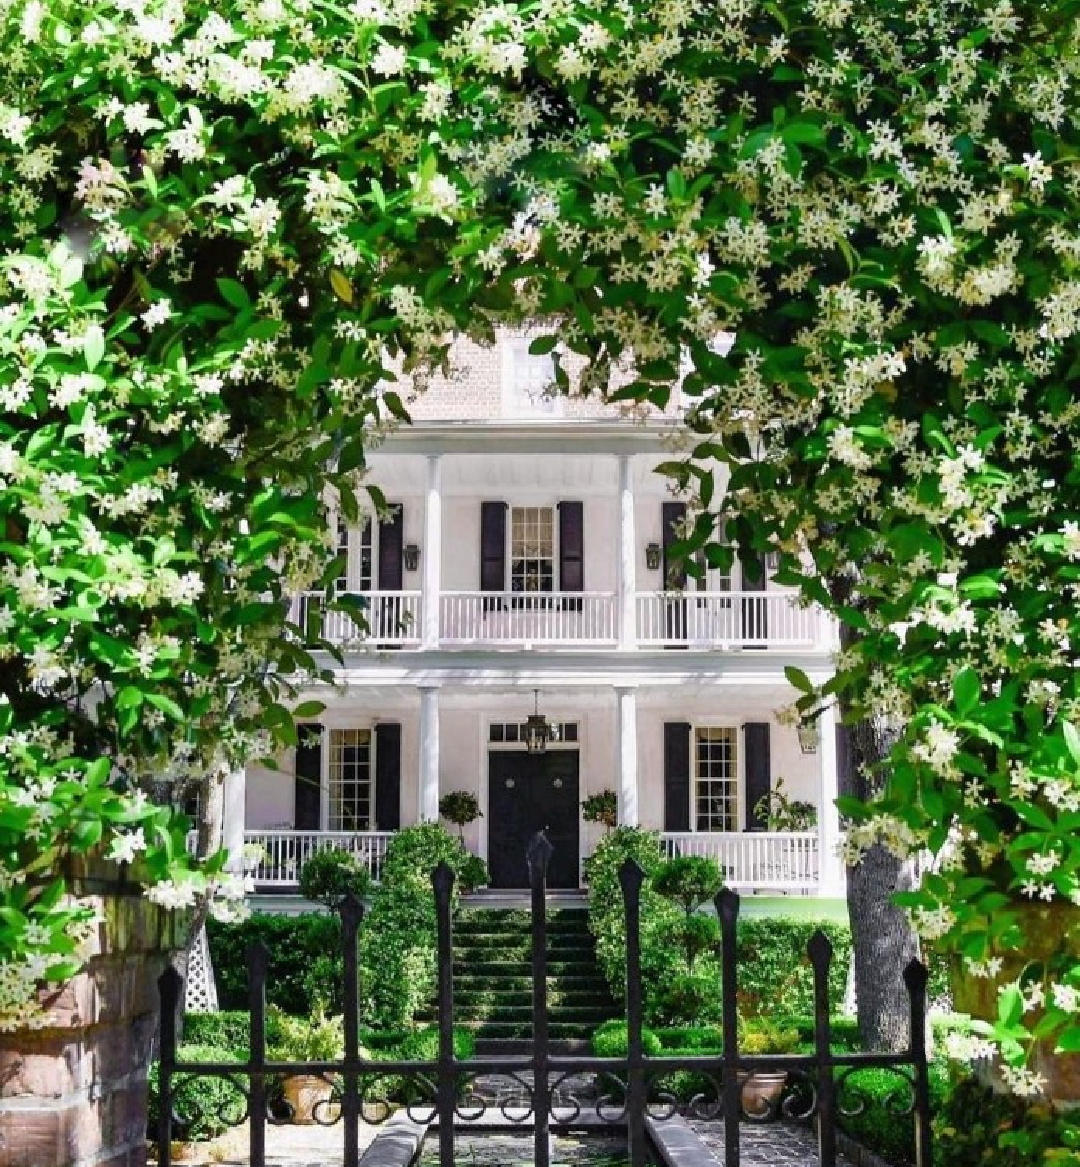 @southerhomemag - Stunning white house exterior with iron gate and jasmine. #classicarchitecture #whitehouses #whitehouseexteriors